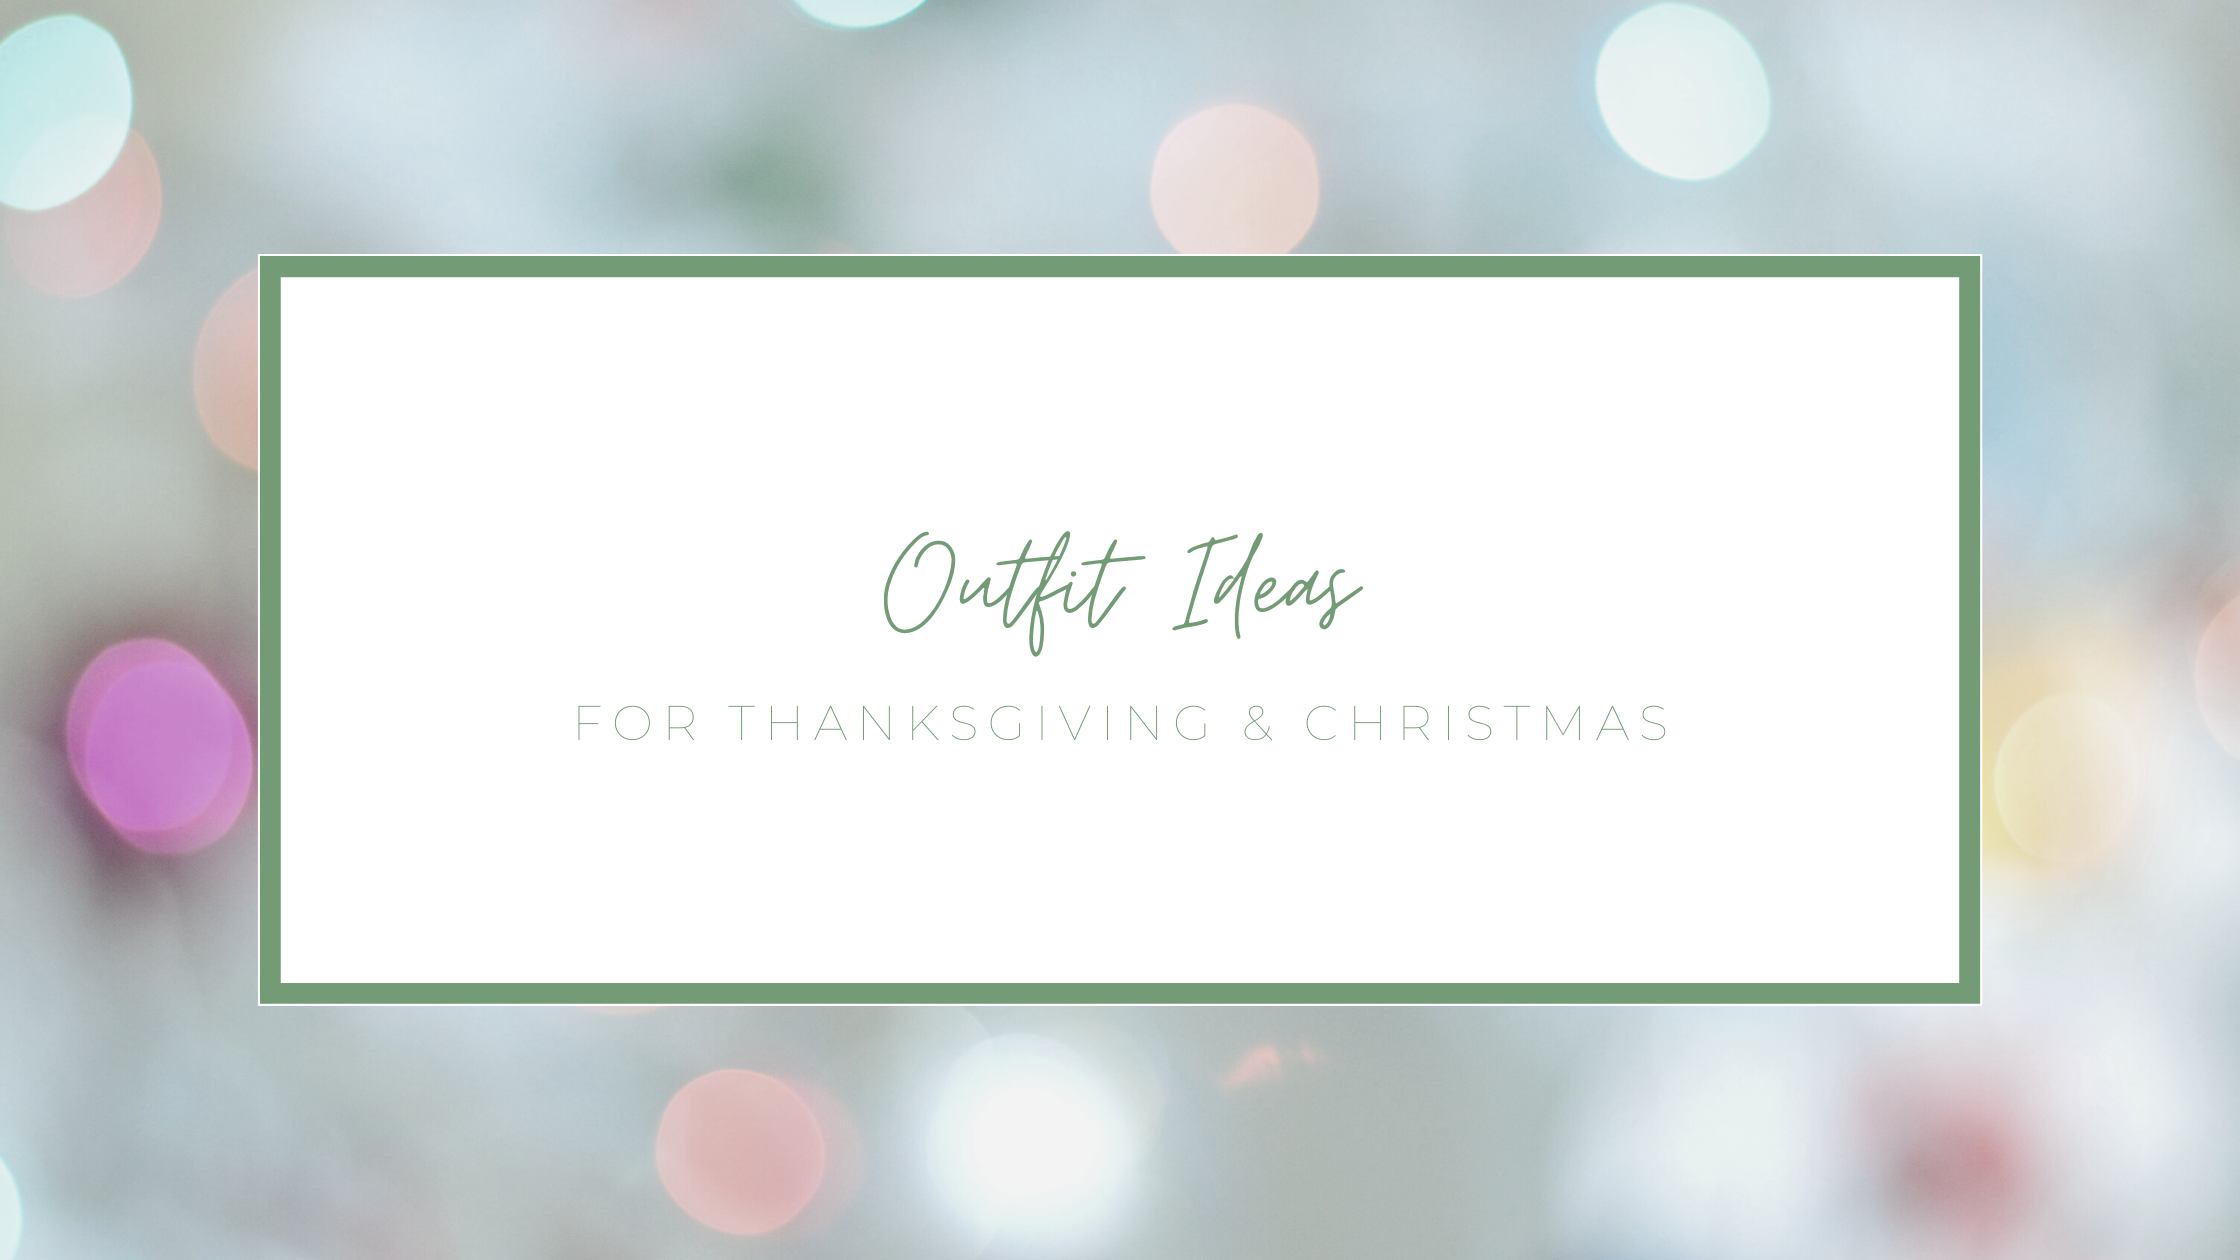 Outfit Ideas for Thanksgiving and Christmas